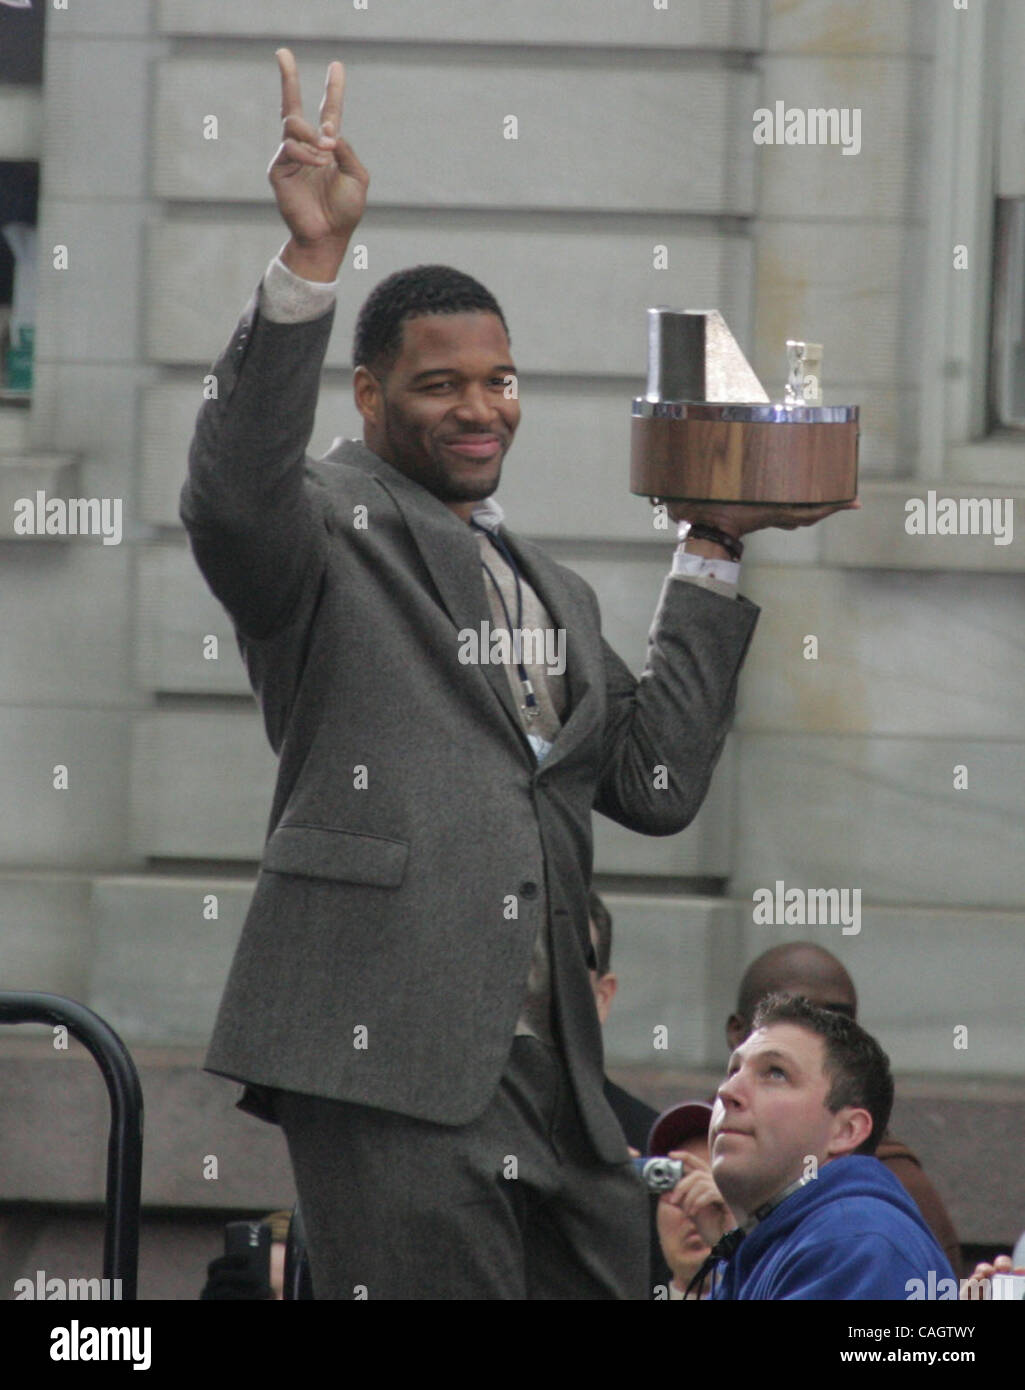 Feb 05, 2008 - New York, NY, USA - New York Giants player MICHAEL STRAHAN holds the George C. Halas trophy of the NFC Championship during New York Giants Super Bowl XLII victory ceremony held at City Hall in Lower Manhattan. (Credit Image: © Nancy Kaszerman/ZUMA Press) Stock Photo